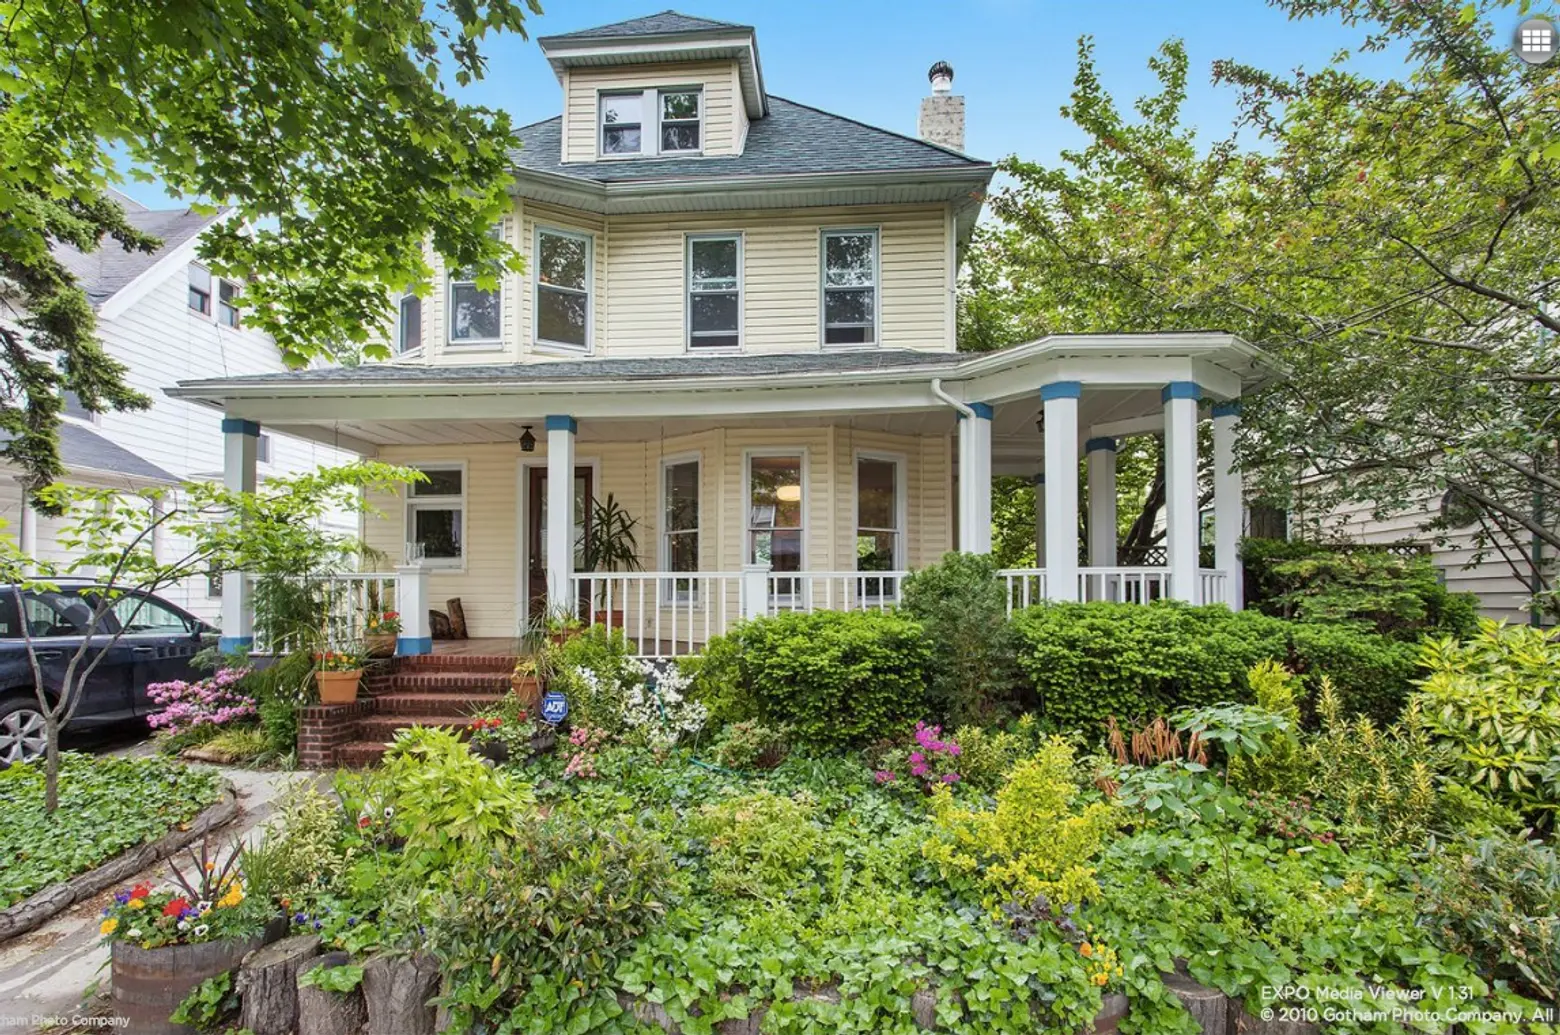 $2.5M Ditmas Park Beauty Has Awesome Green Space and an Artist Studio